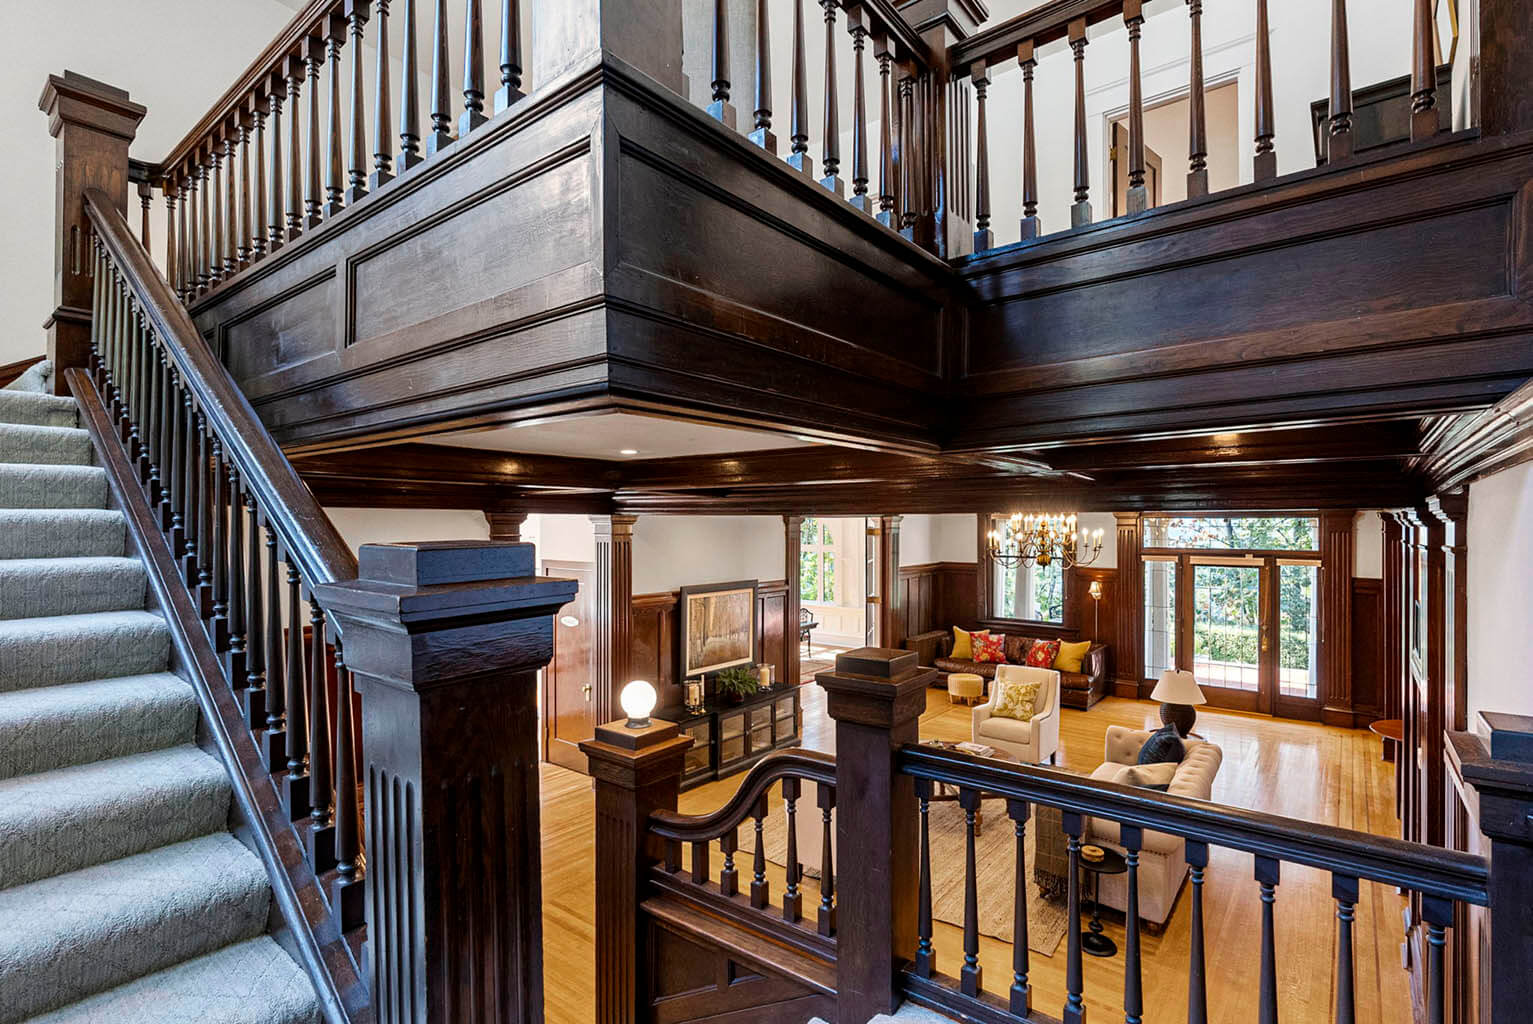 Grand staircase is open to the living room